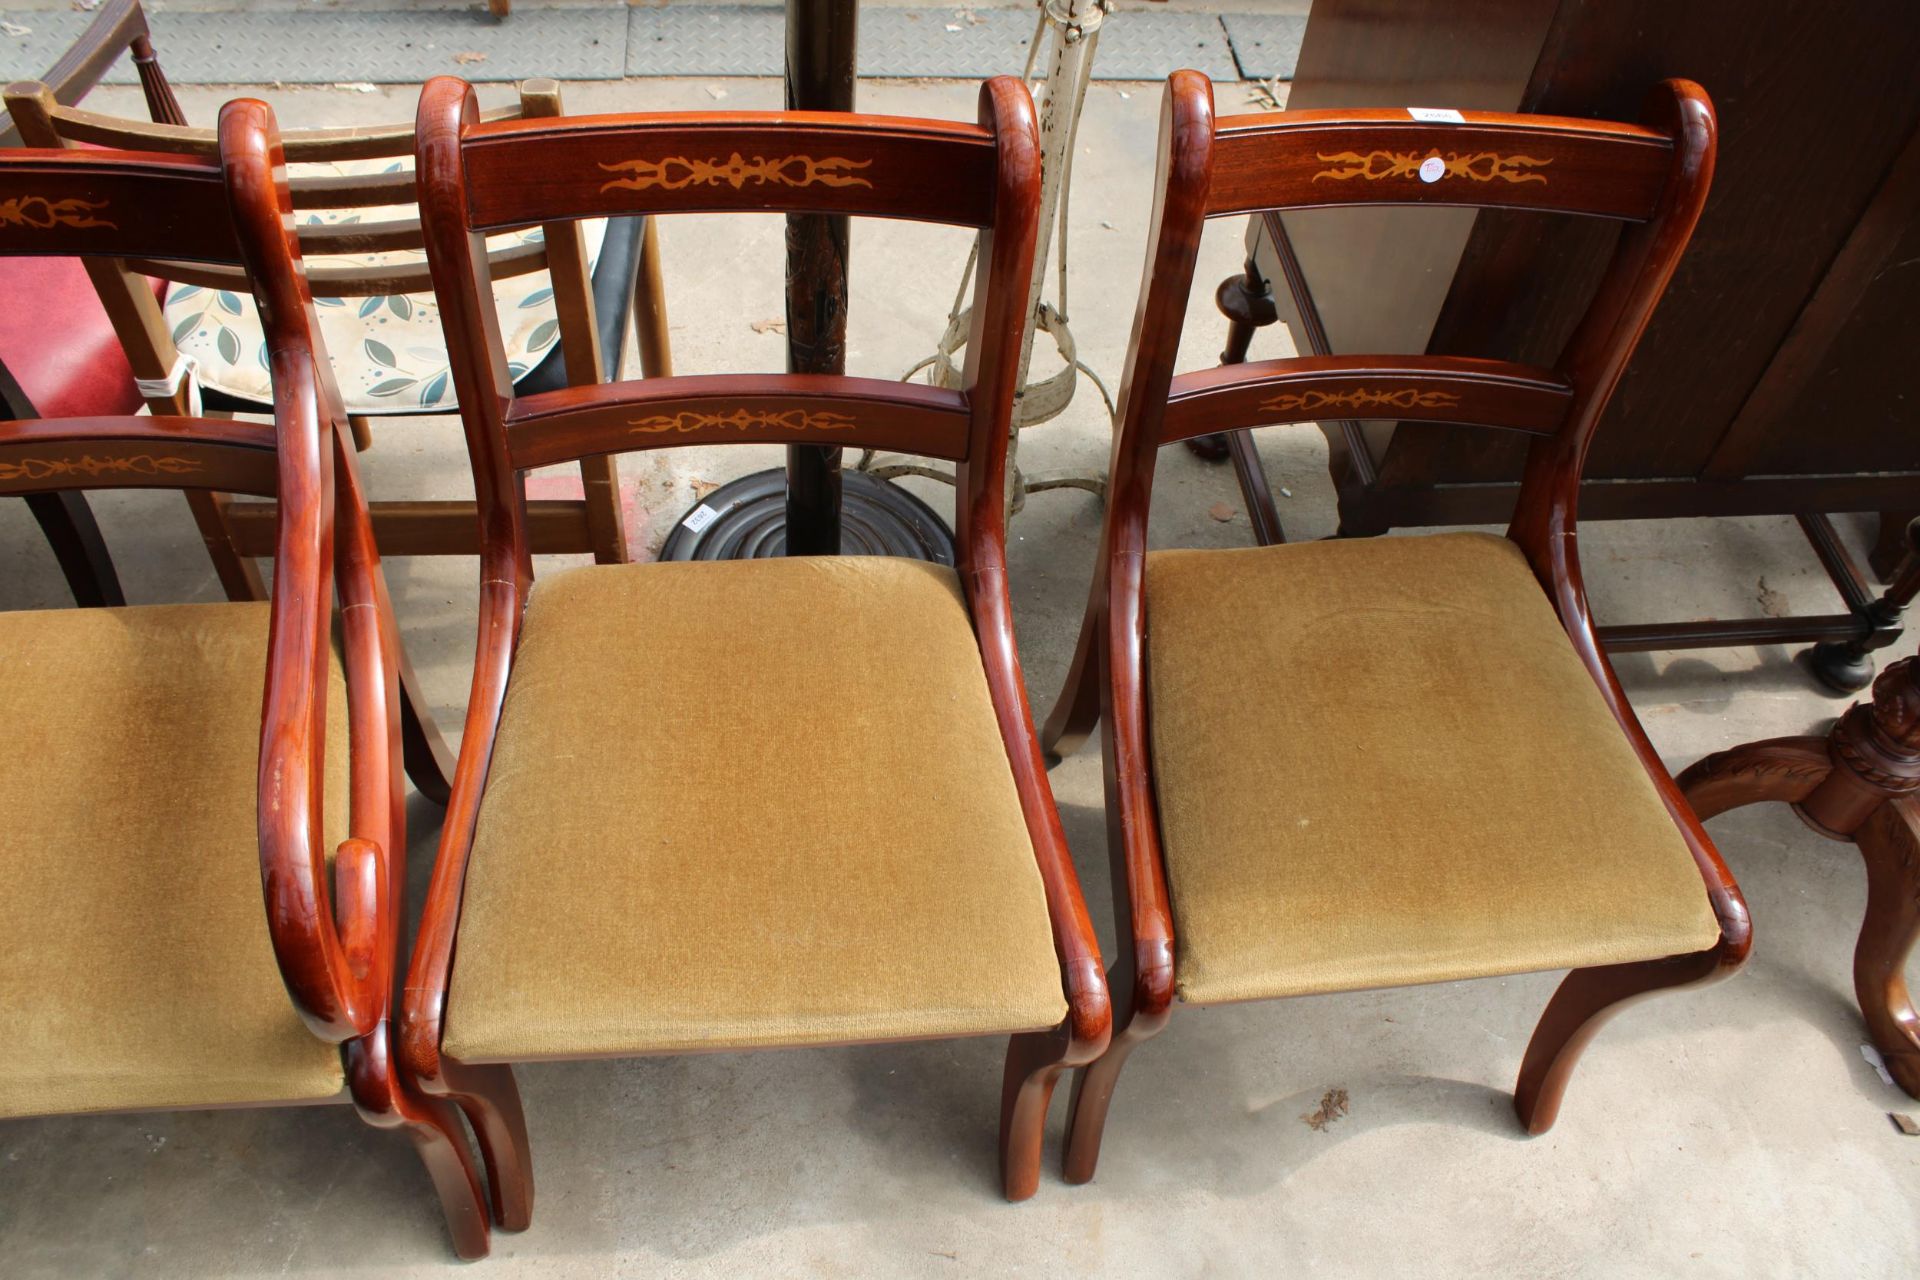 A SET OF SIX REGENCY STYLE DINING CHAIRS - Image 6 of 6